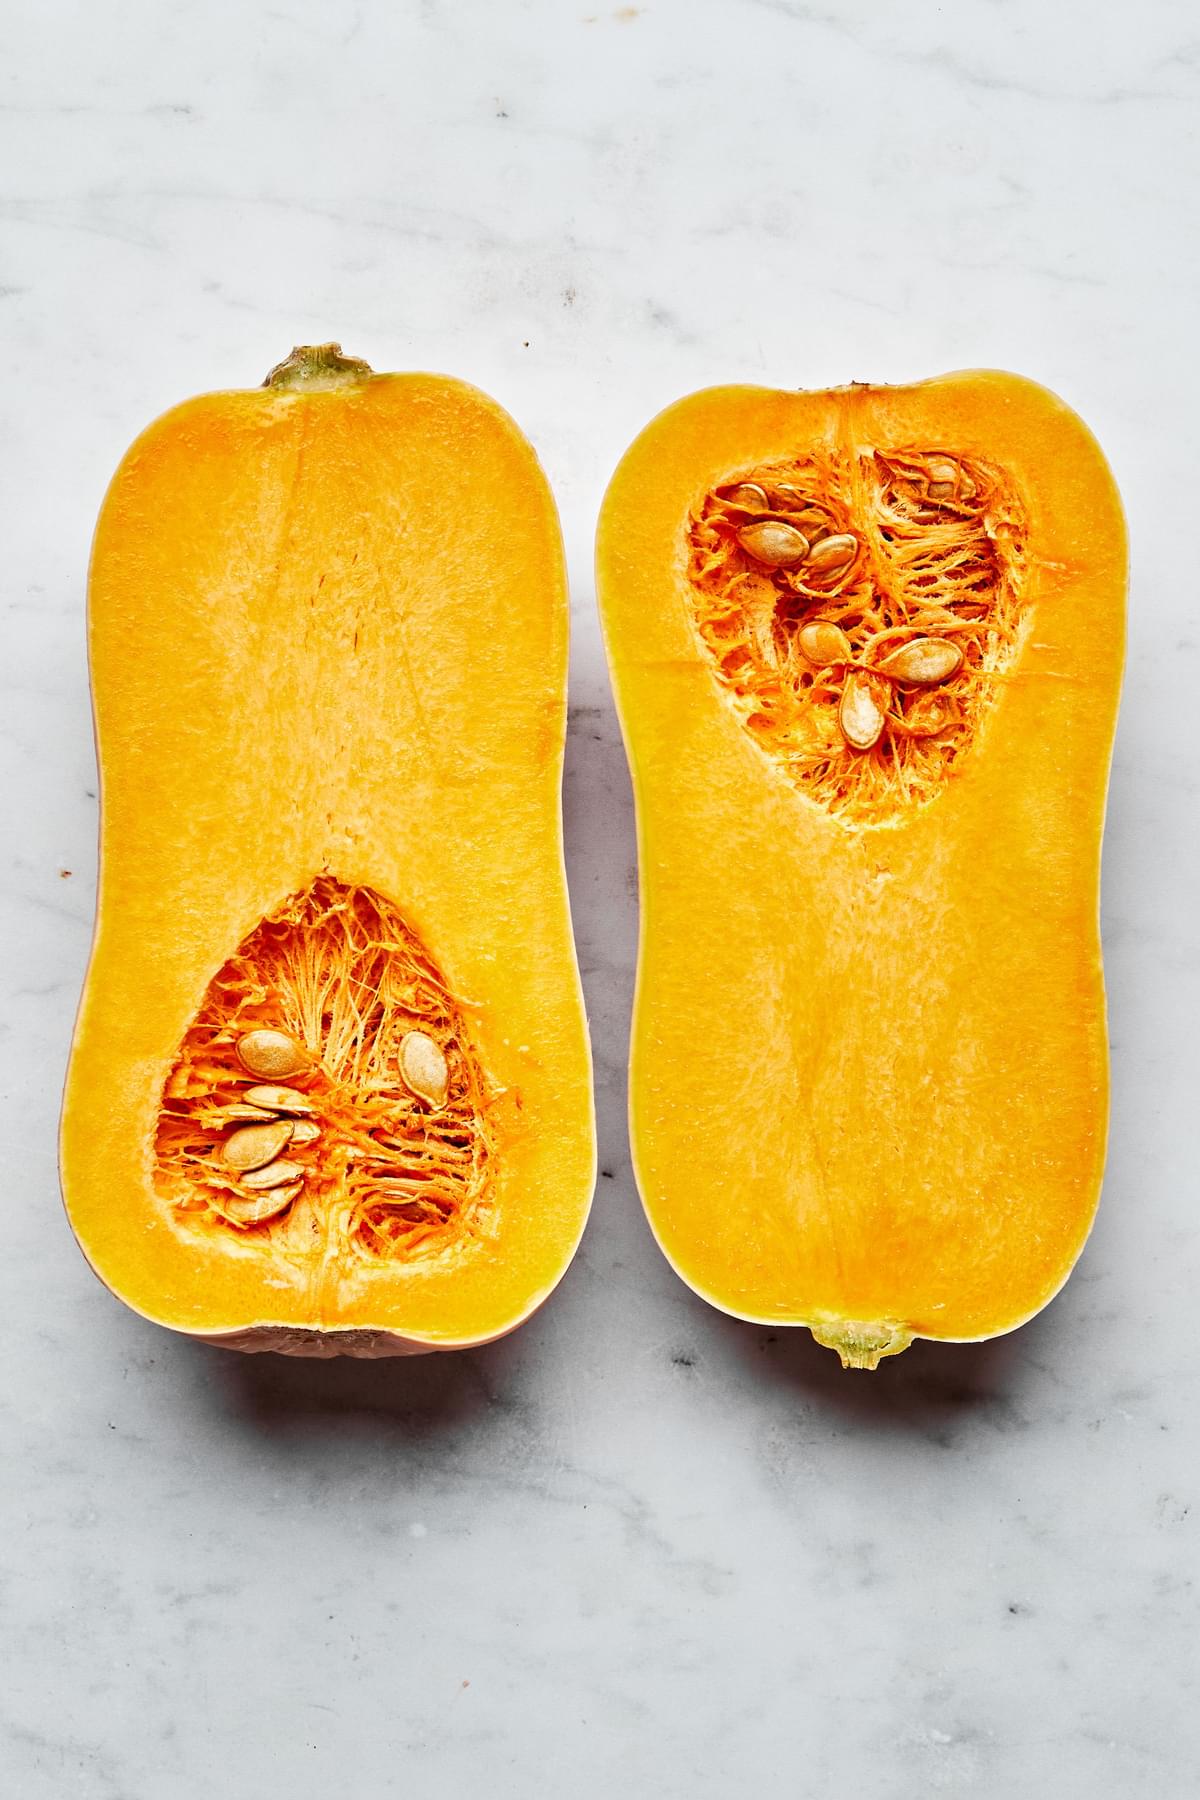 a raw butternut squash cut in half lengthwise on the counter